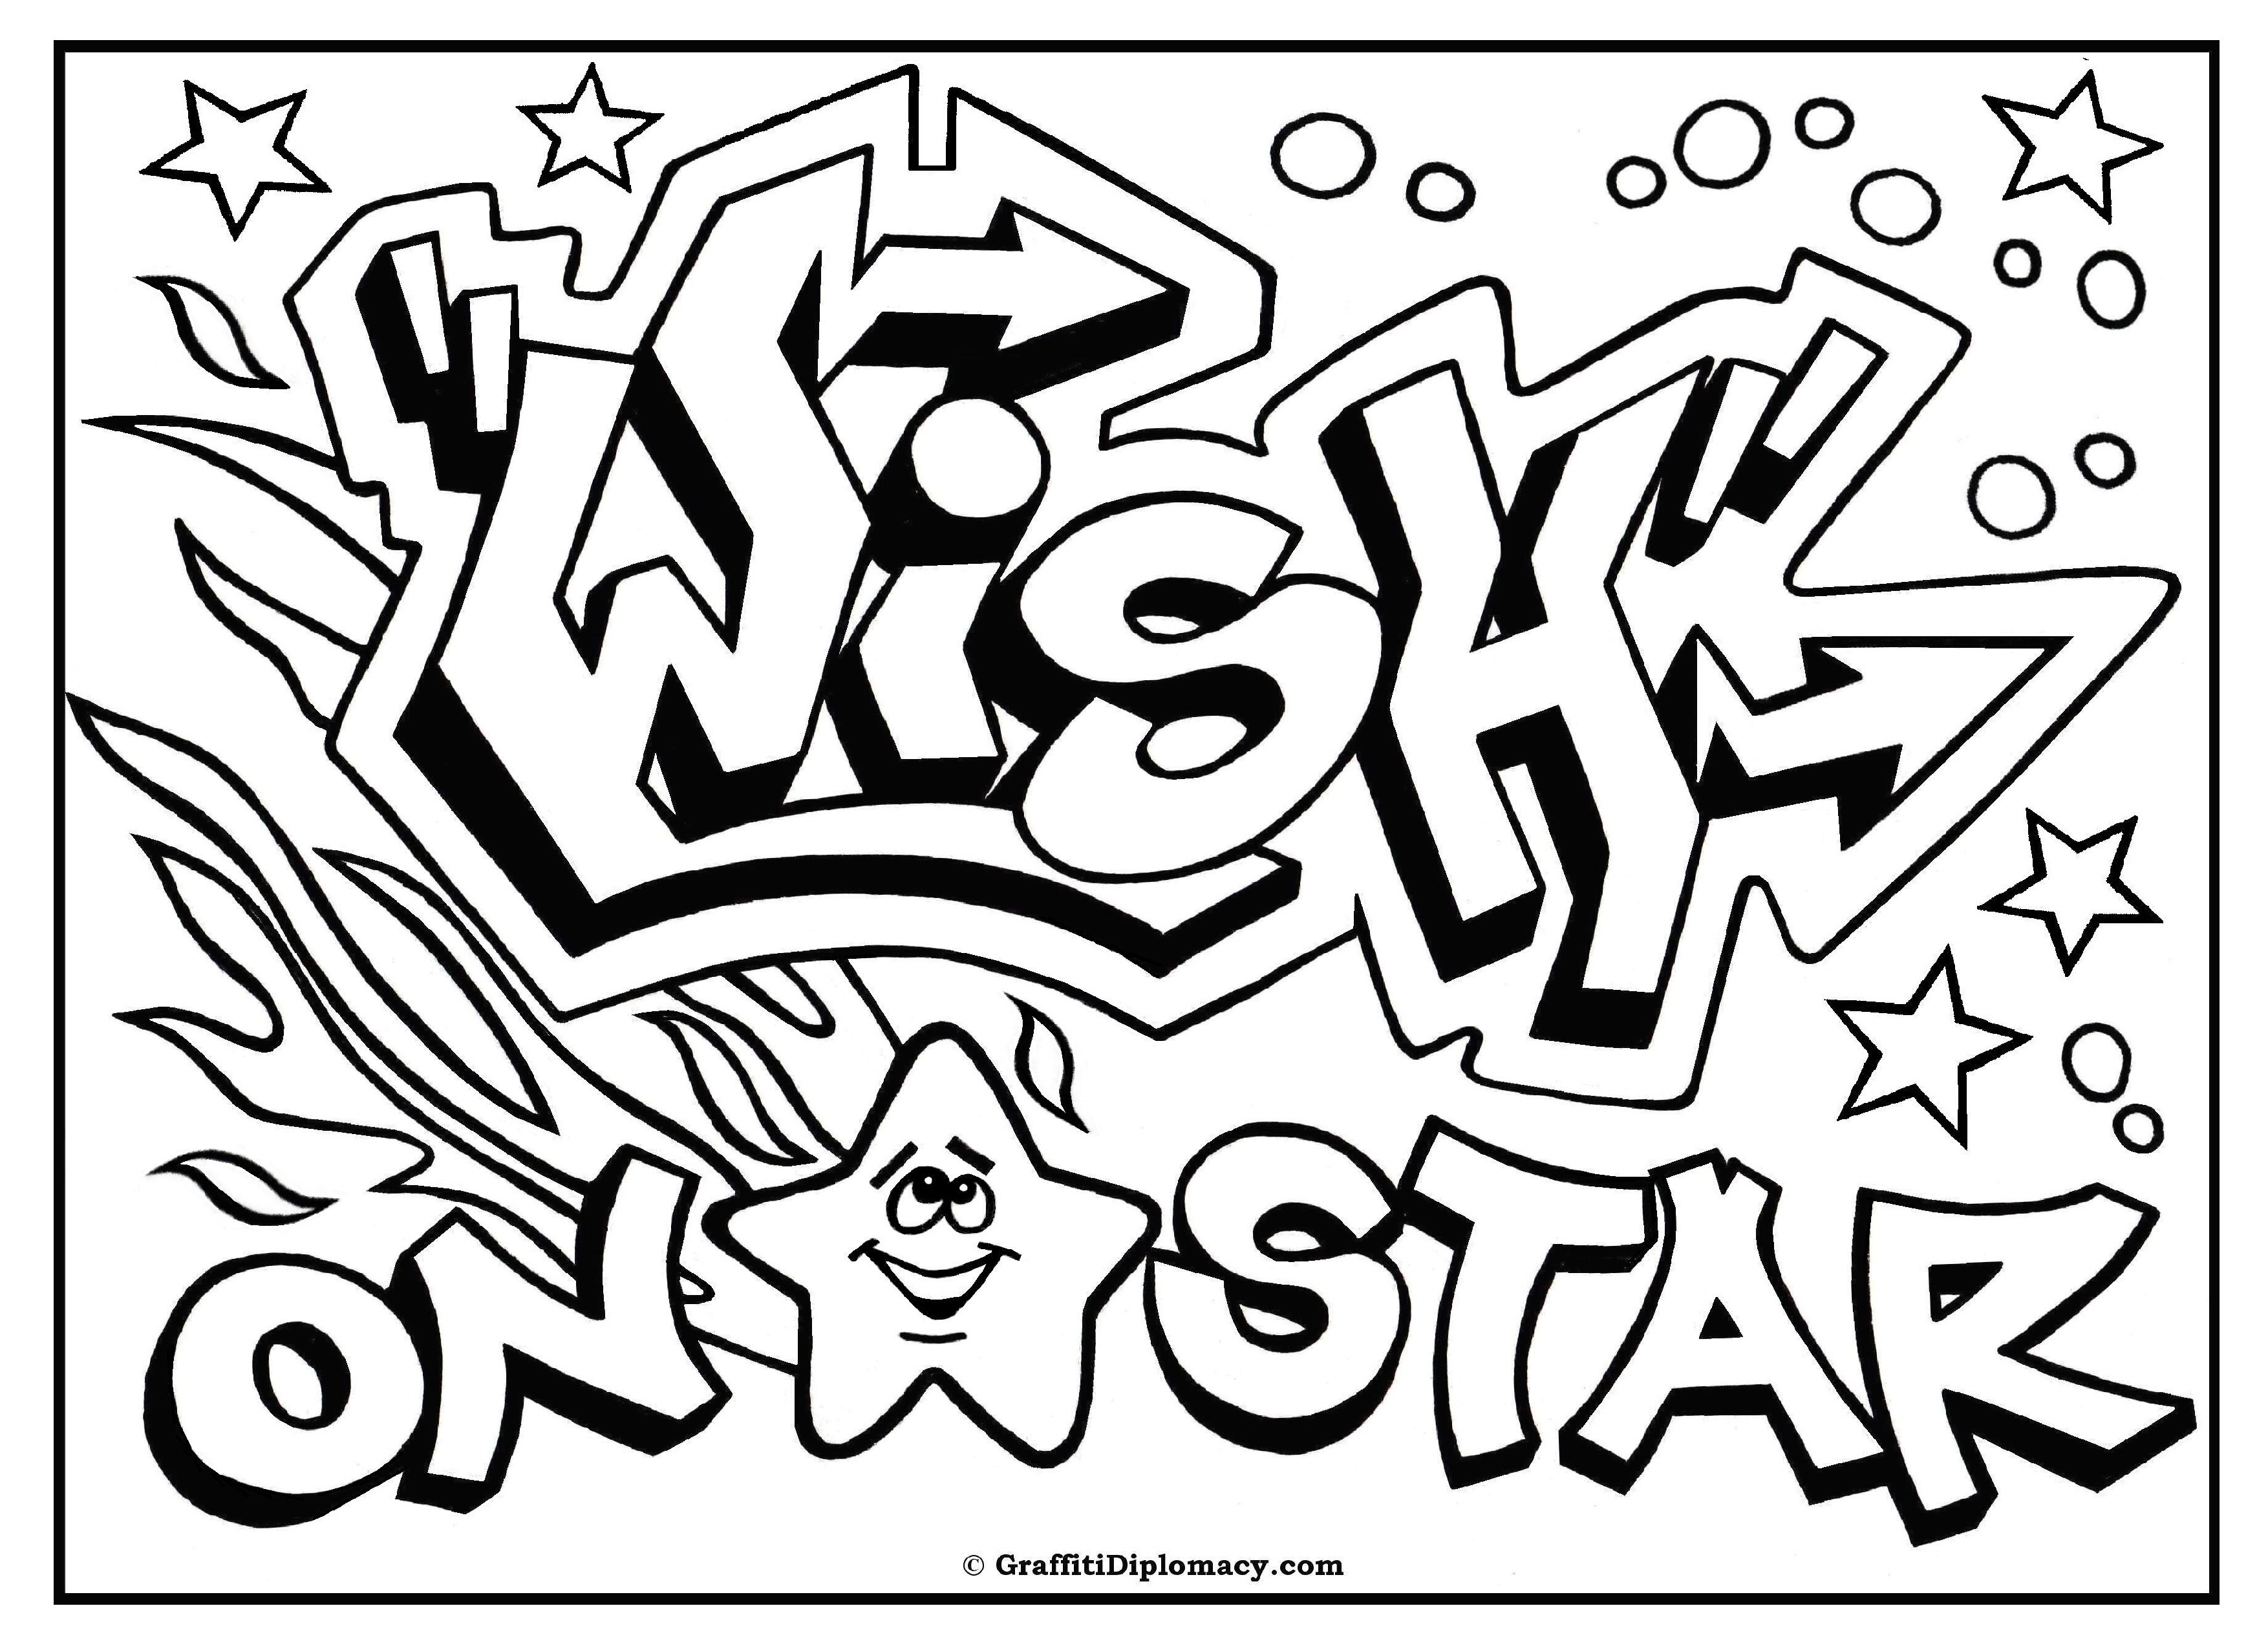 Thanksgiving Design Word Coloring Pages For Teens
 OMG Another Graffiti Coloring Book of Room Signs Learn